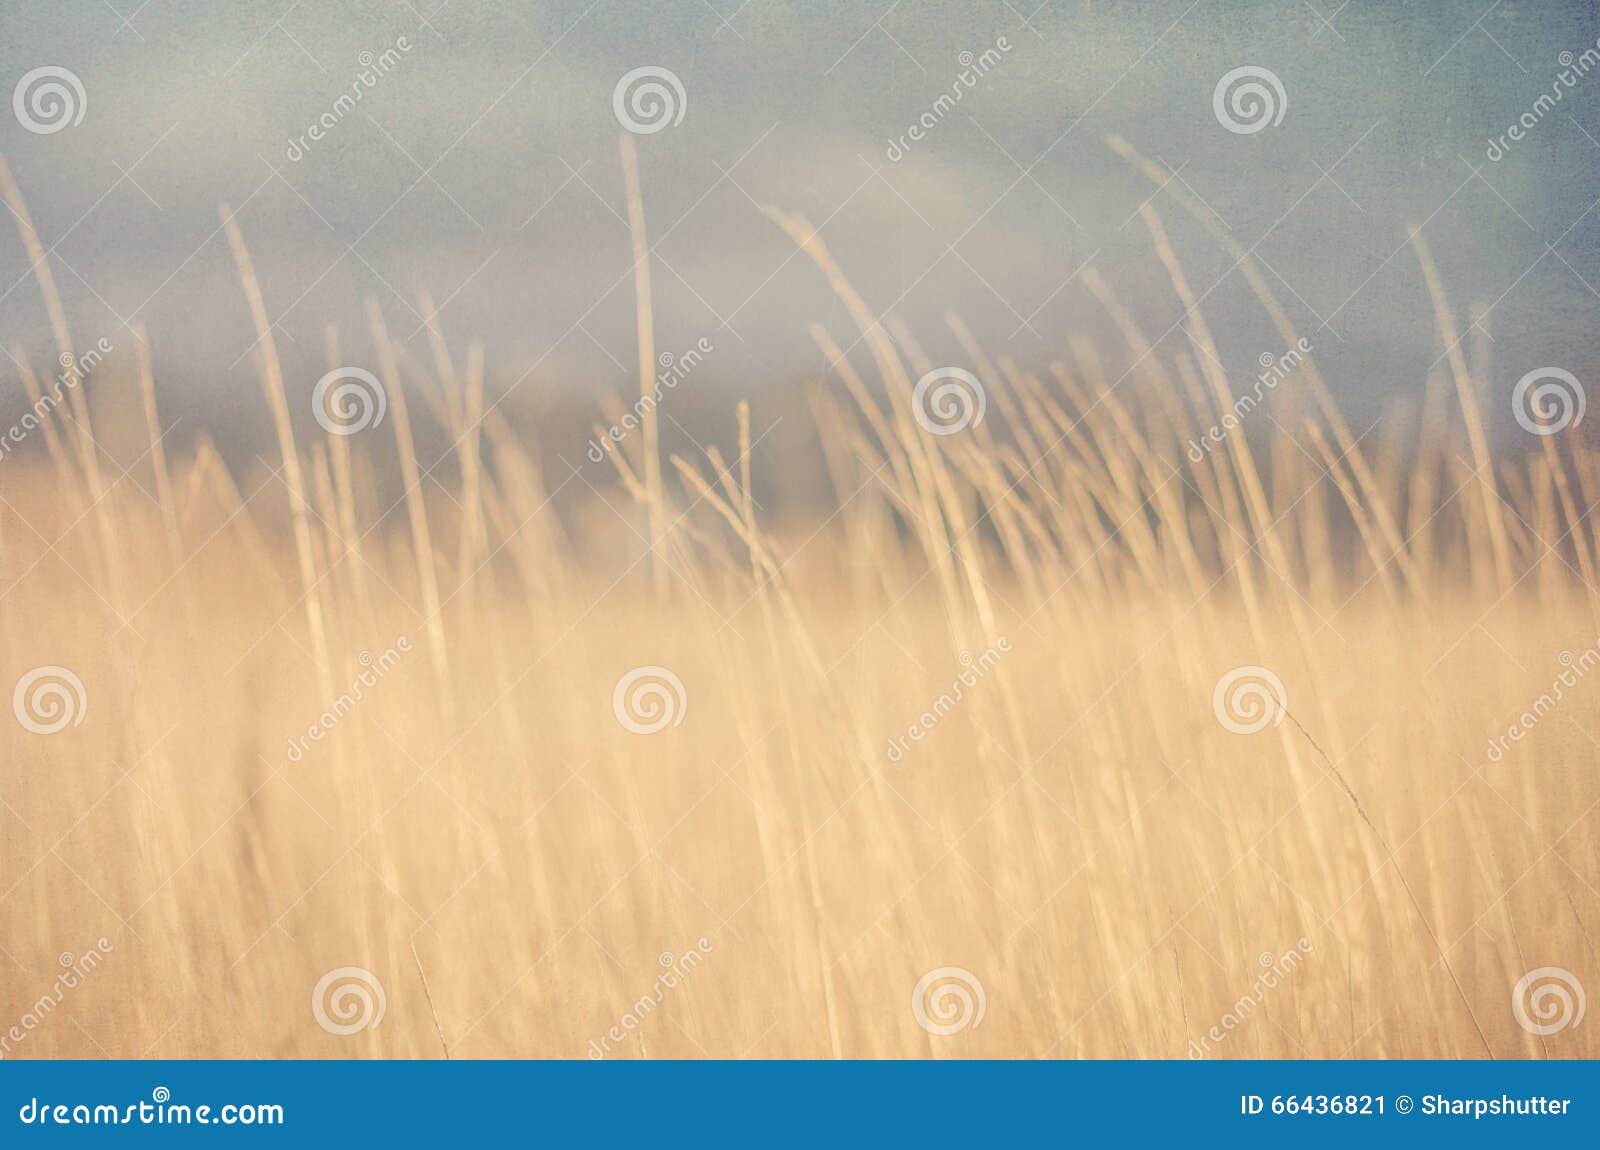 Tall Dry Grass In Field Stock Image Image Of Landscape 66436821